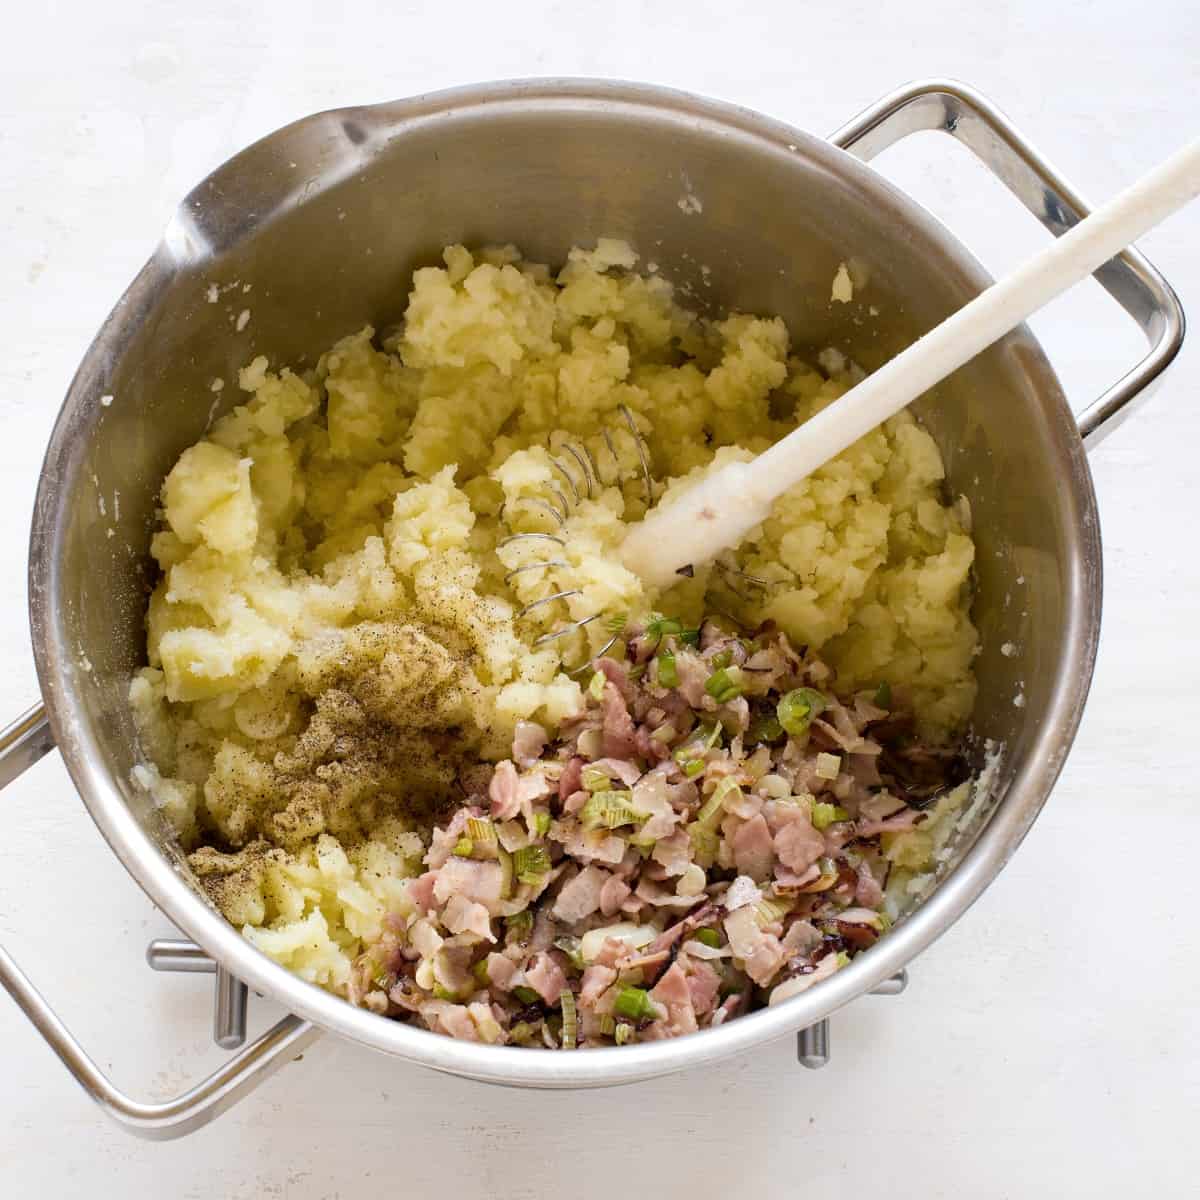 Adding bacon and onions to the mashed potatoes.